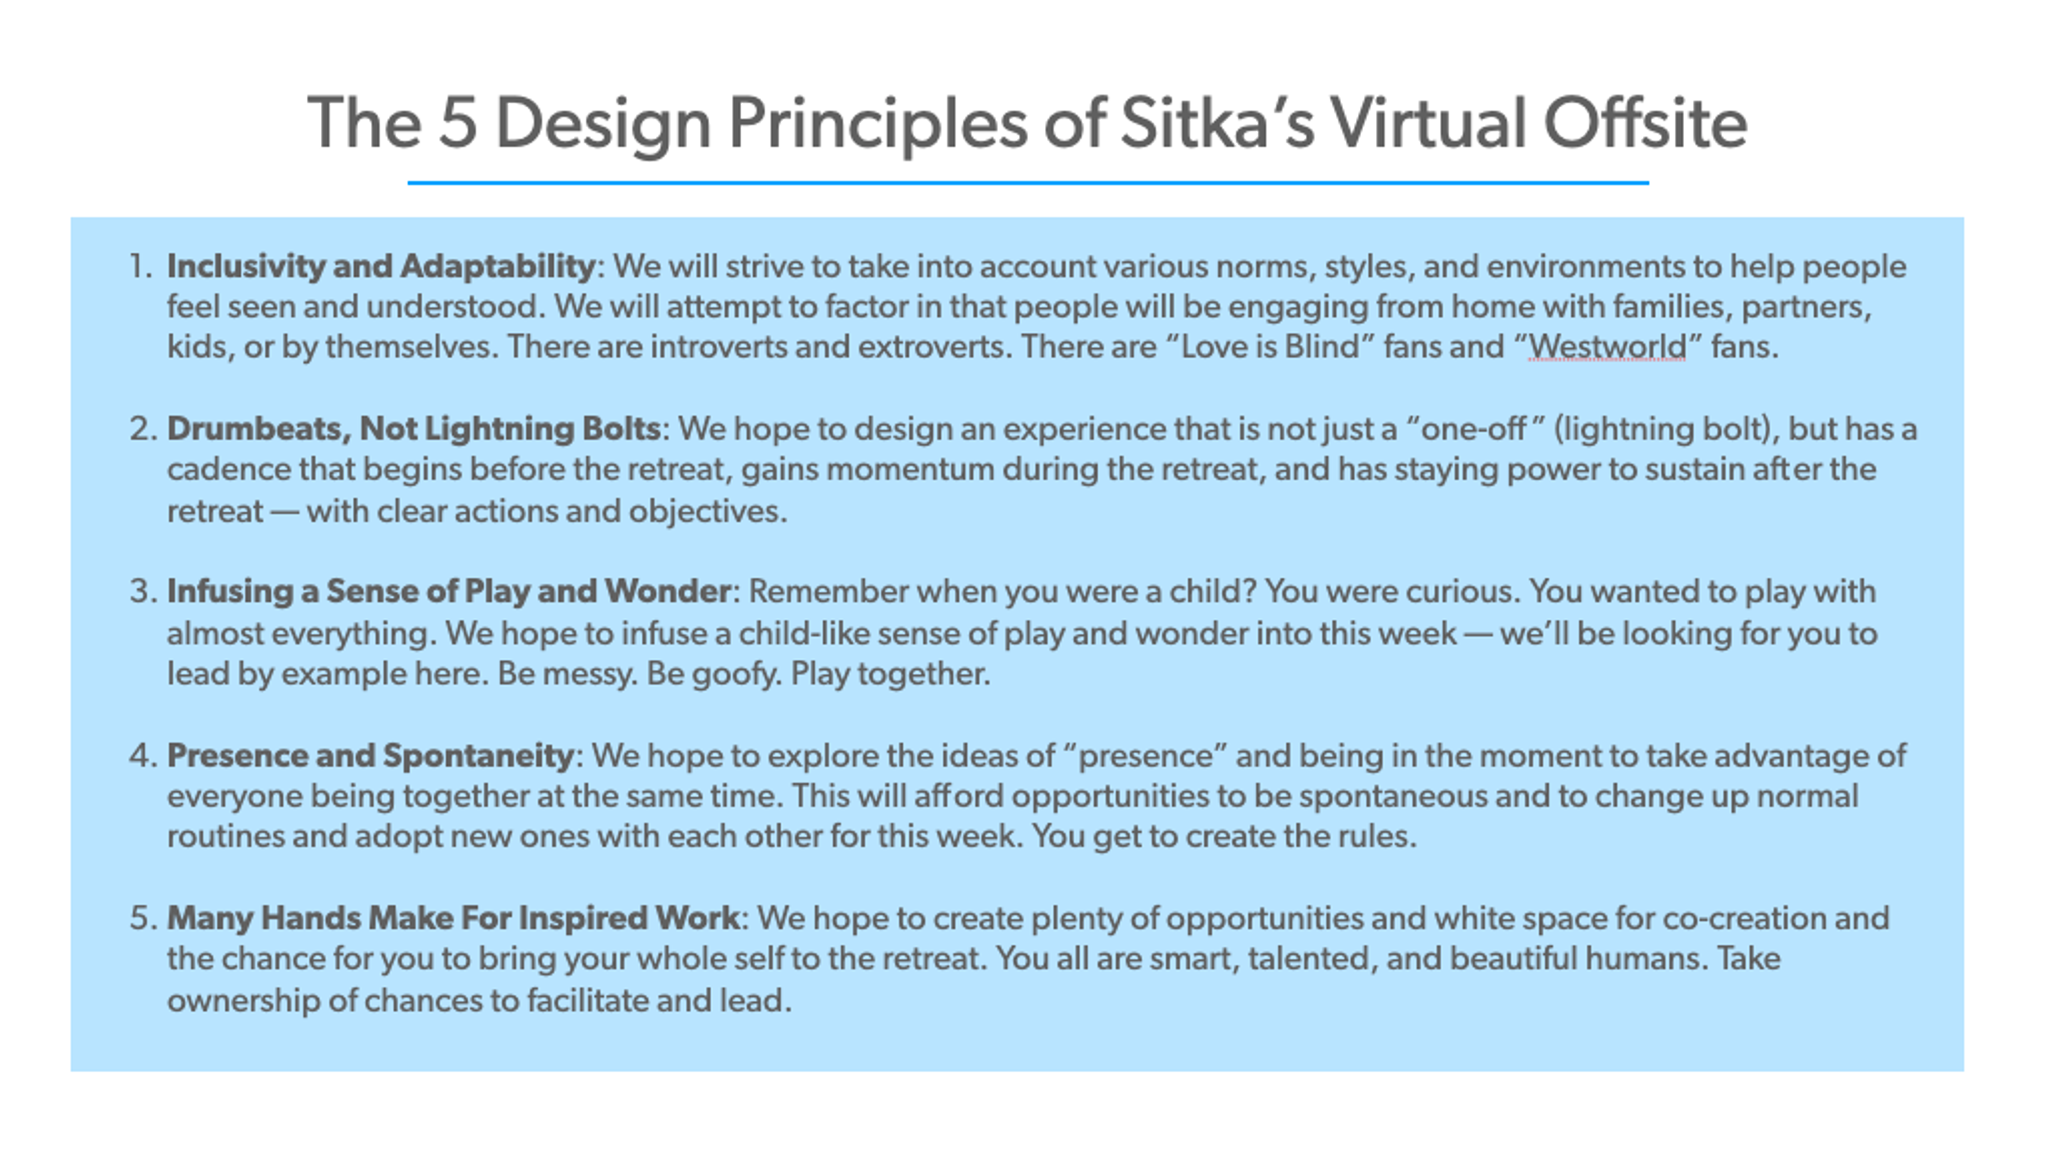 The 5 design principles of Sitka's virtual offsite